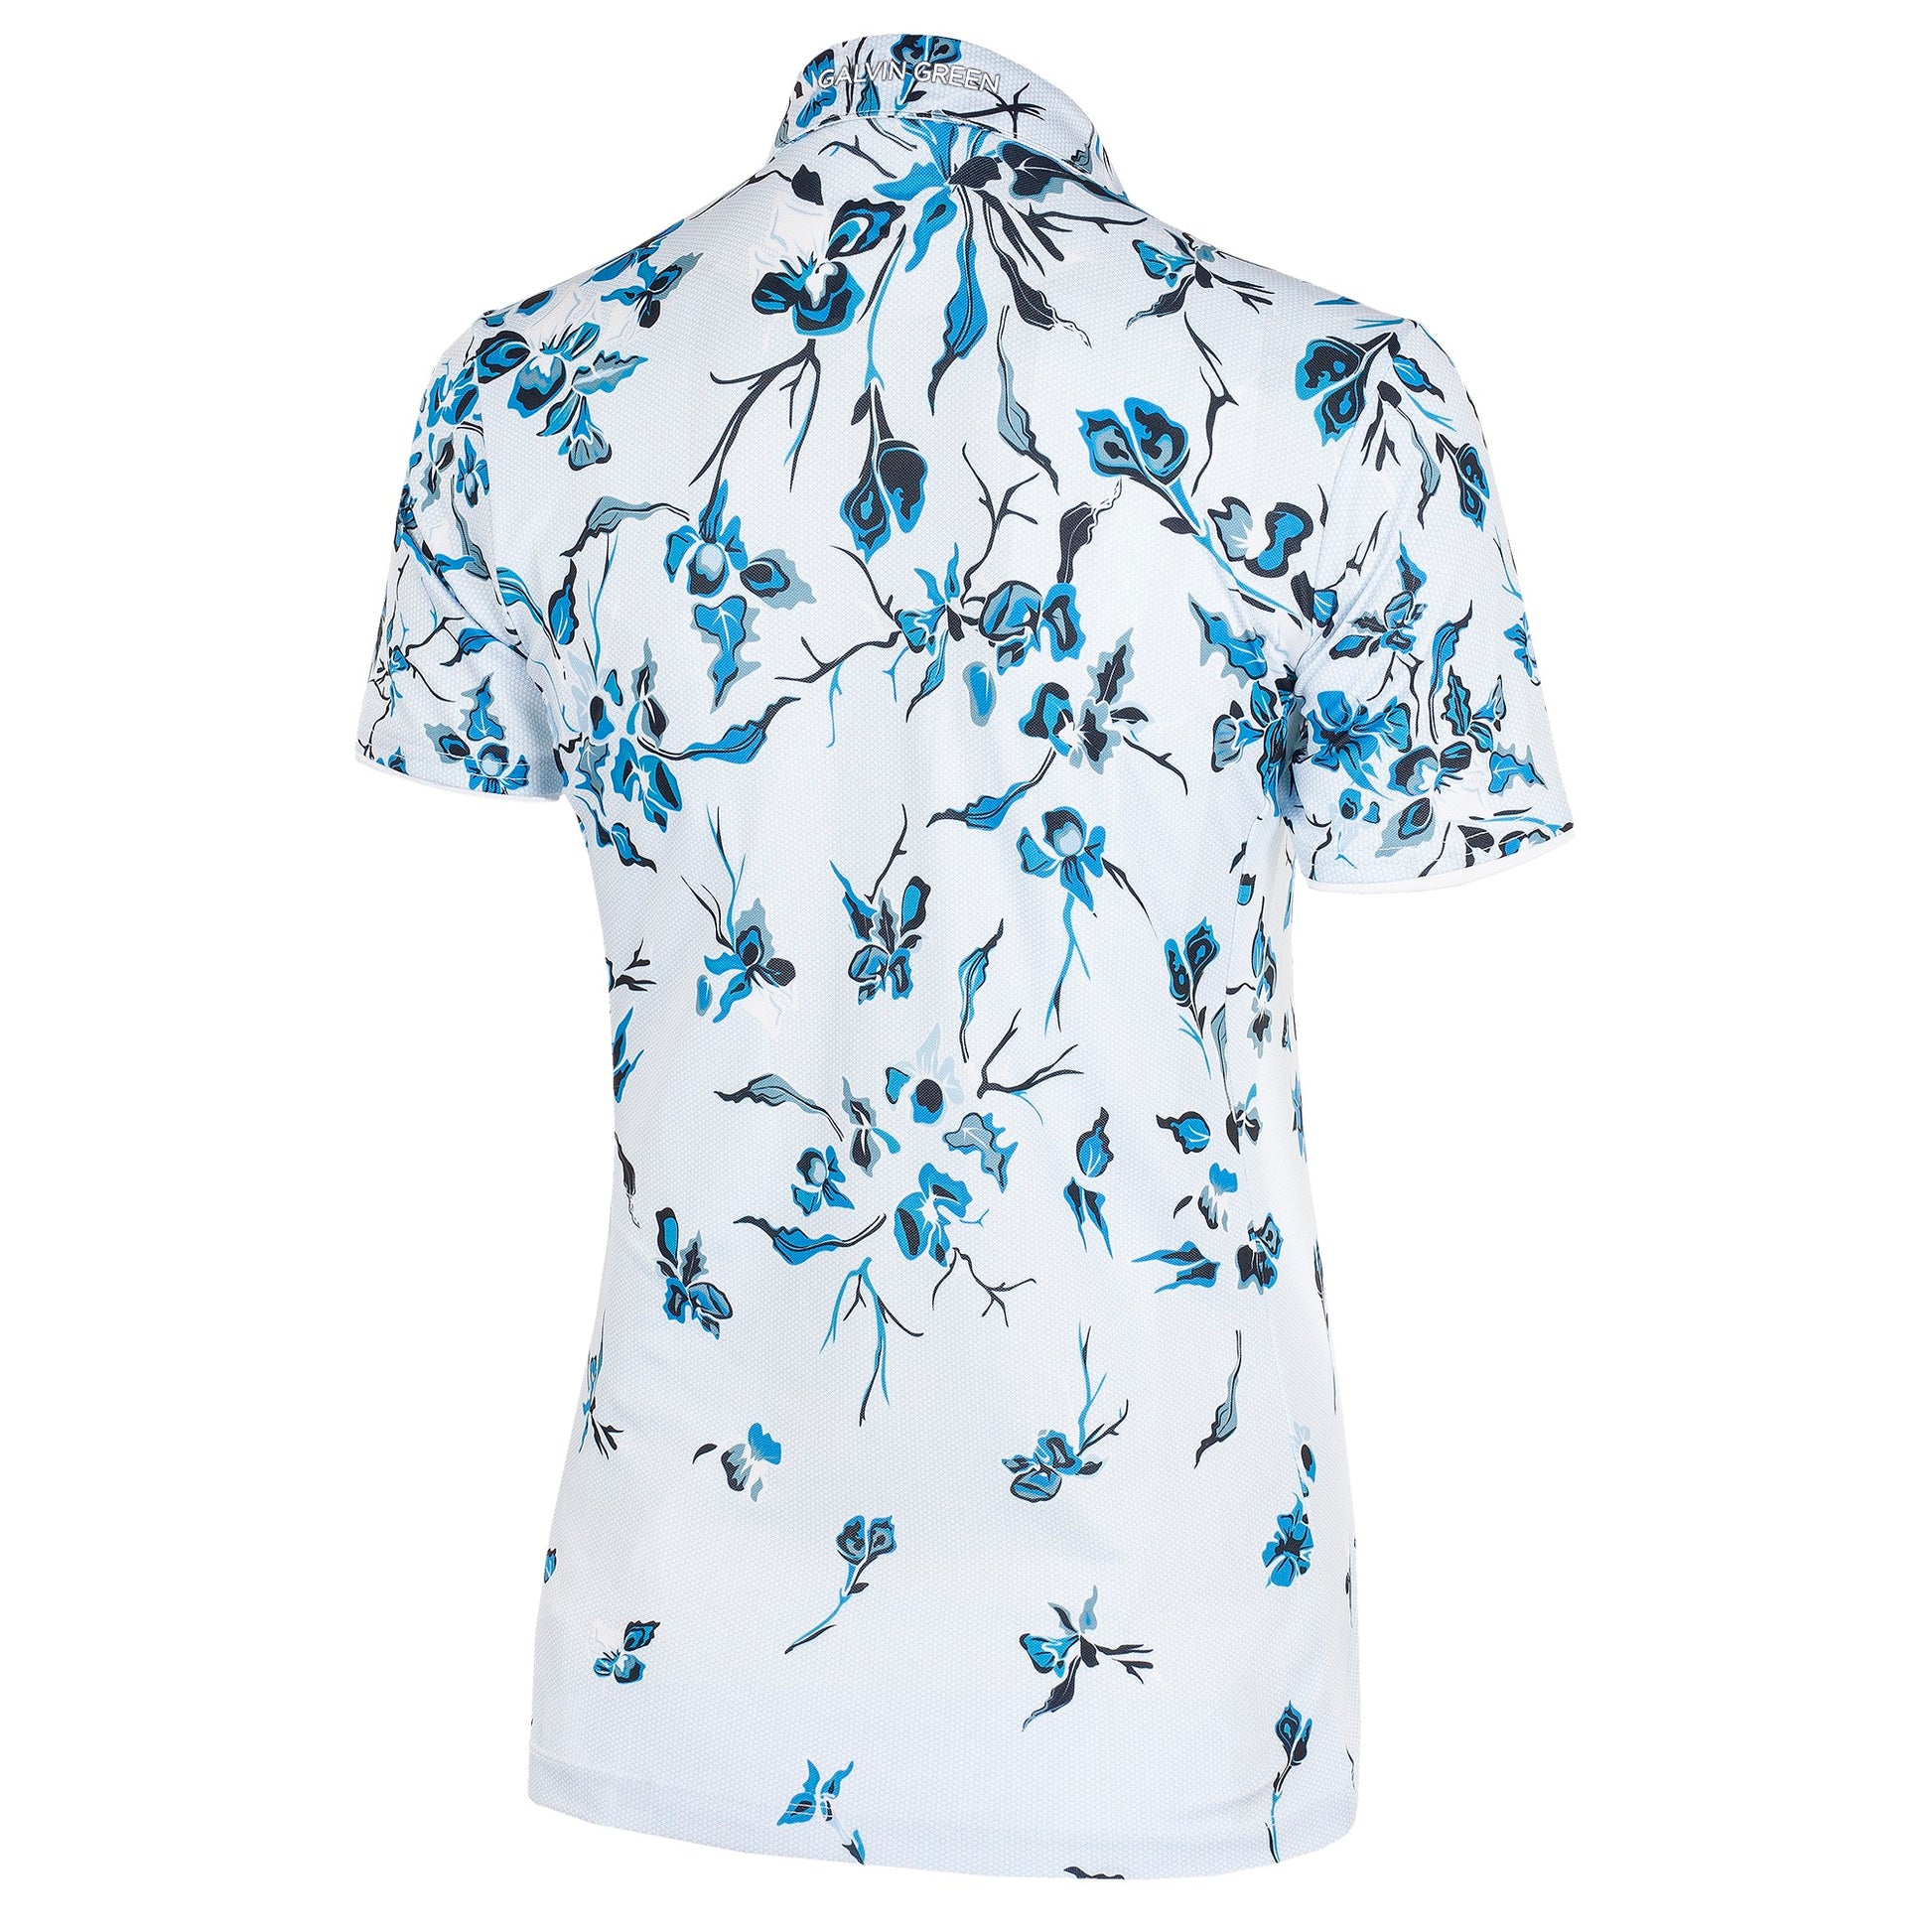 Galvin Green Ladies Floral Print Polo Shirt with VENTIL8 PLUS in Navy/Blue/White